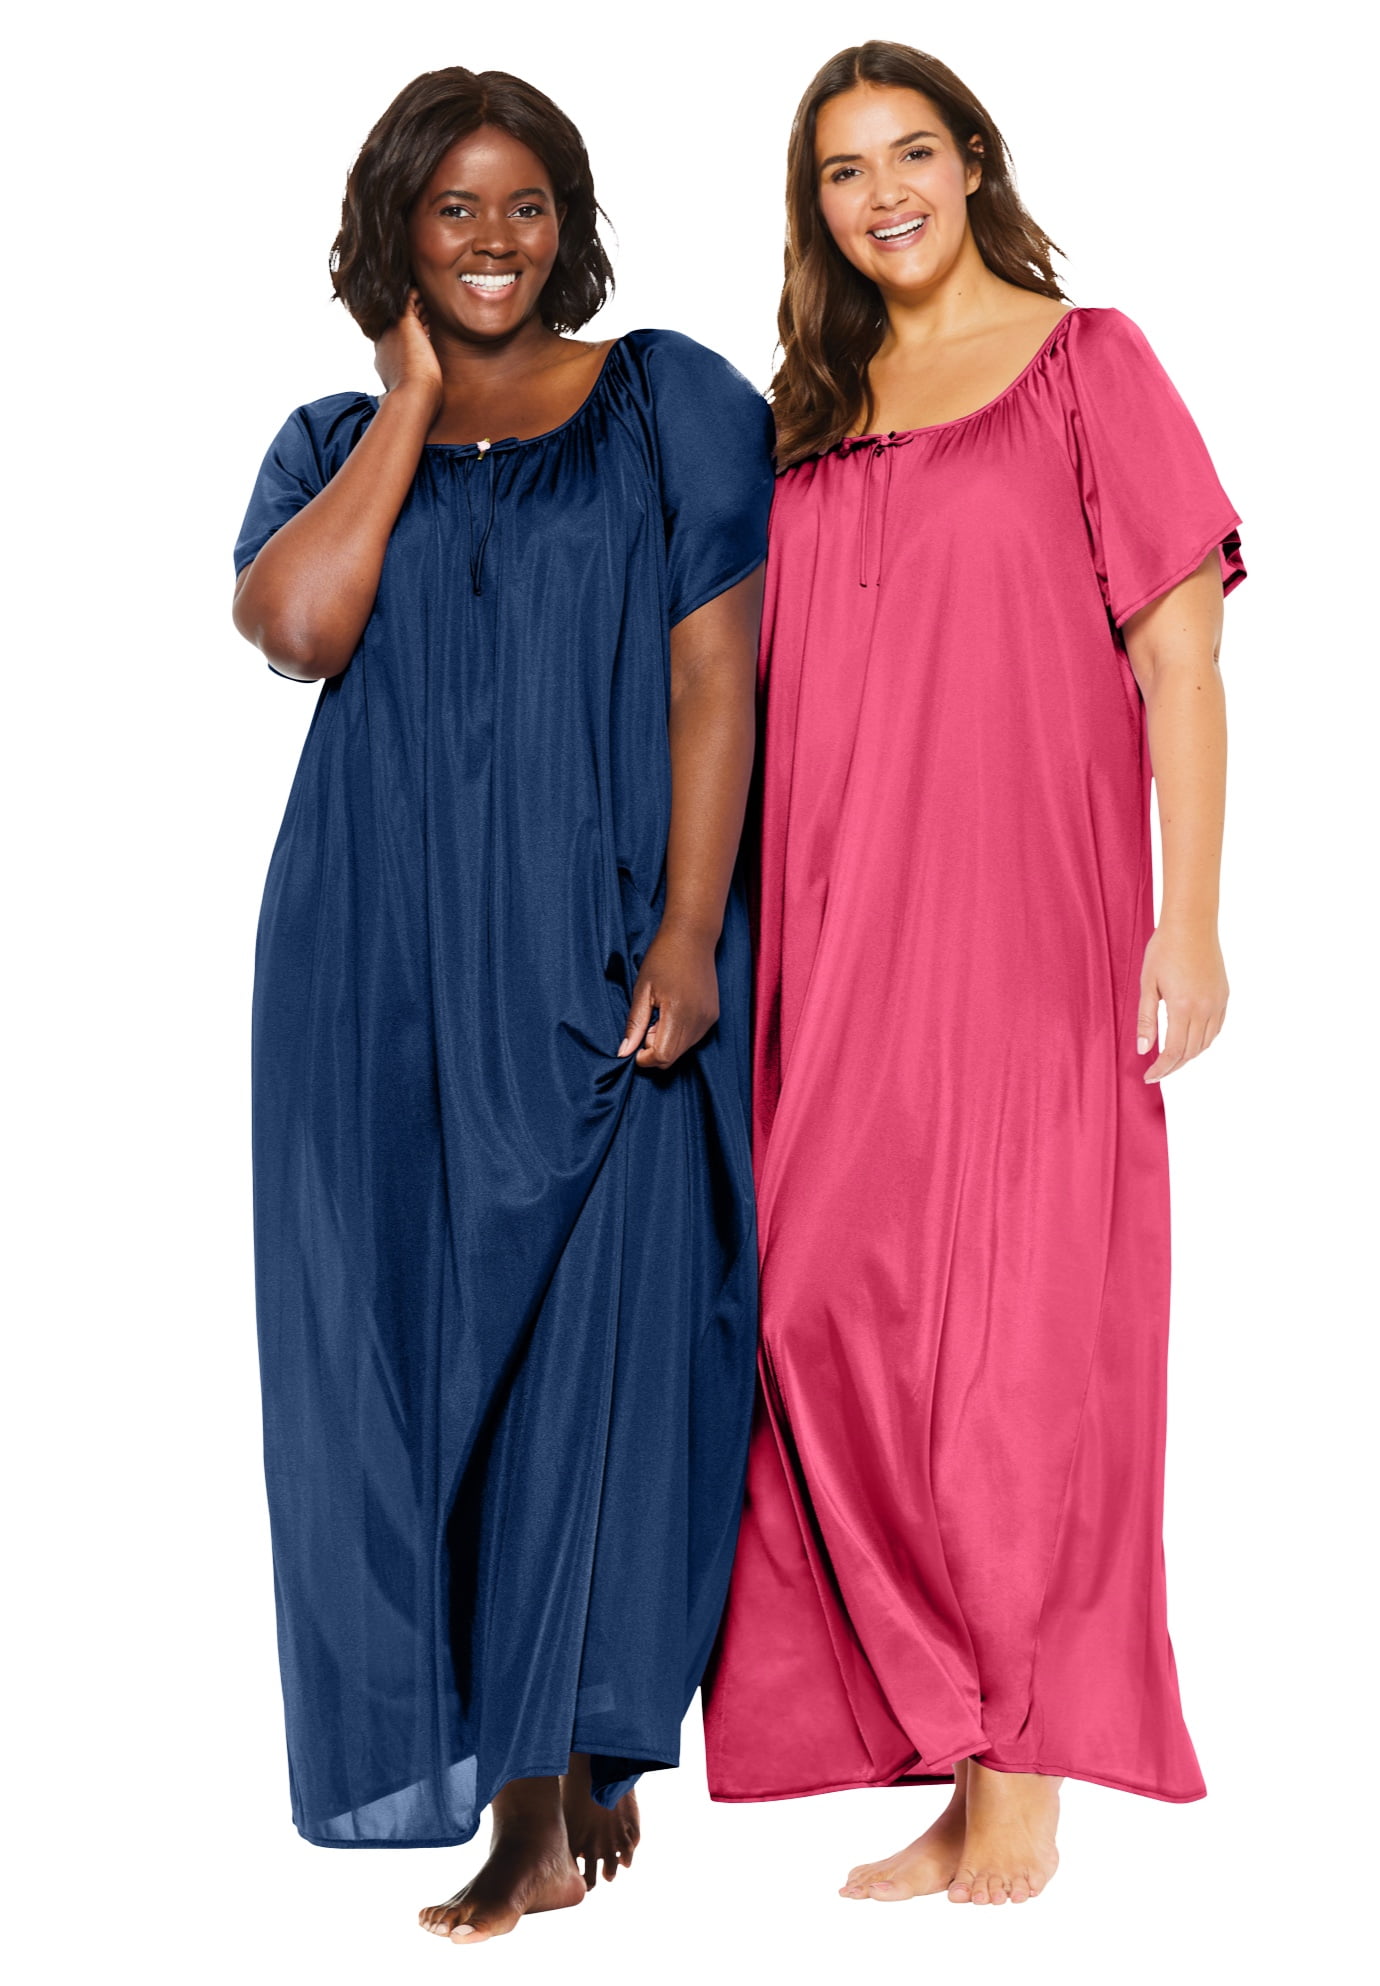 Only Necessities Only Necessities Womens Plus Size 2 Pack Long Silky Gown Pajamas Walmart